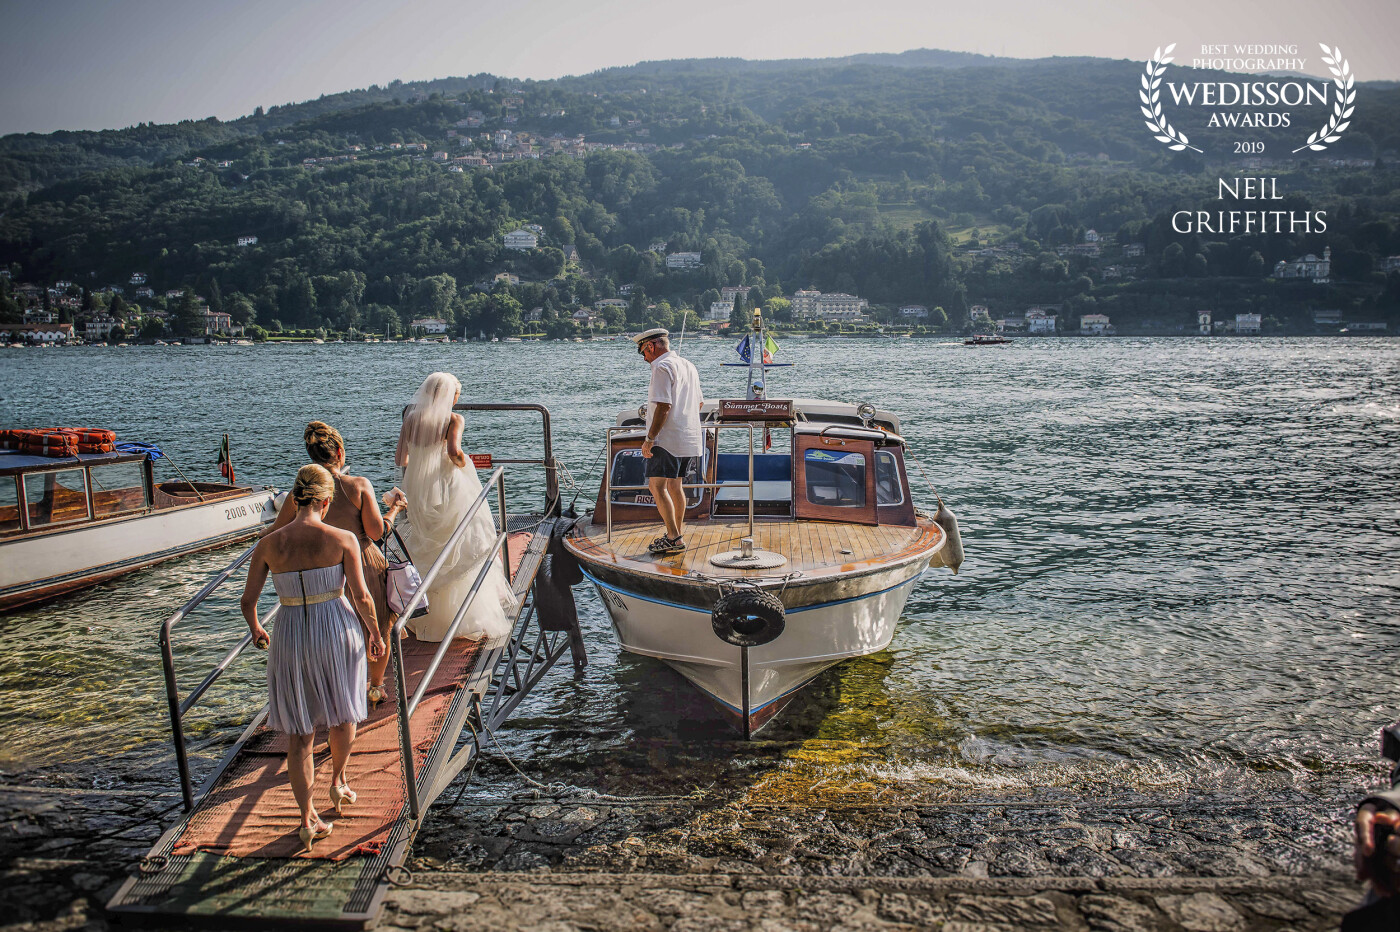 Amazing location, Baveno near Milan. The couple chartered a speedboat for half an hour to go with their bridesmaids to an island on the lake for some pictures. This was what I got as they returned to the boat. Wonderful light.